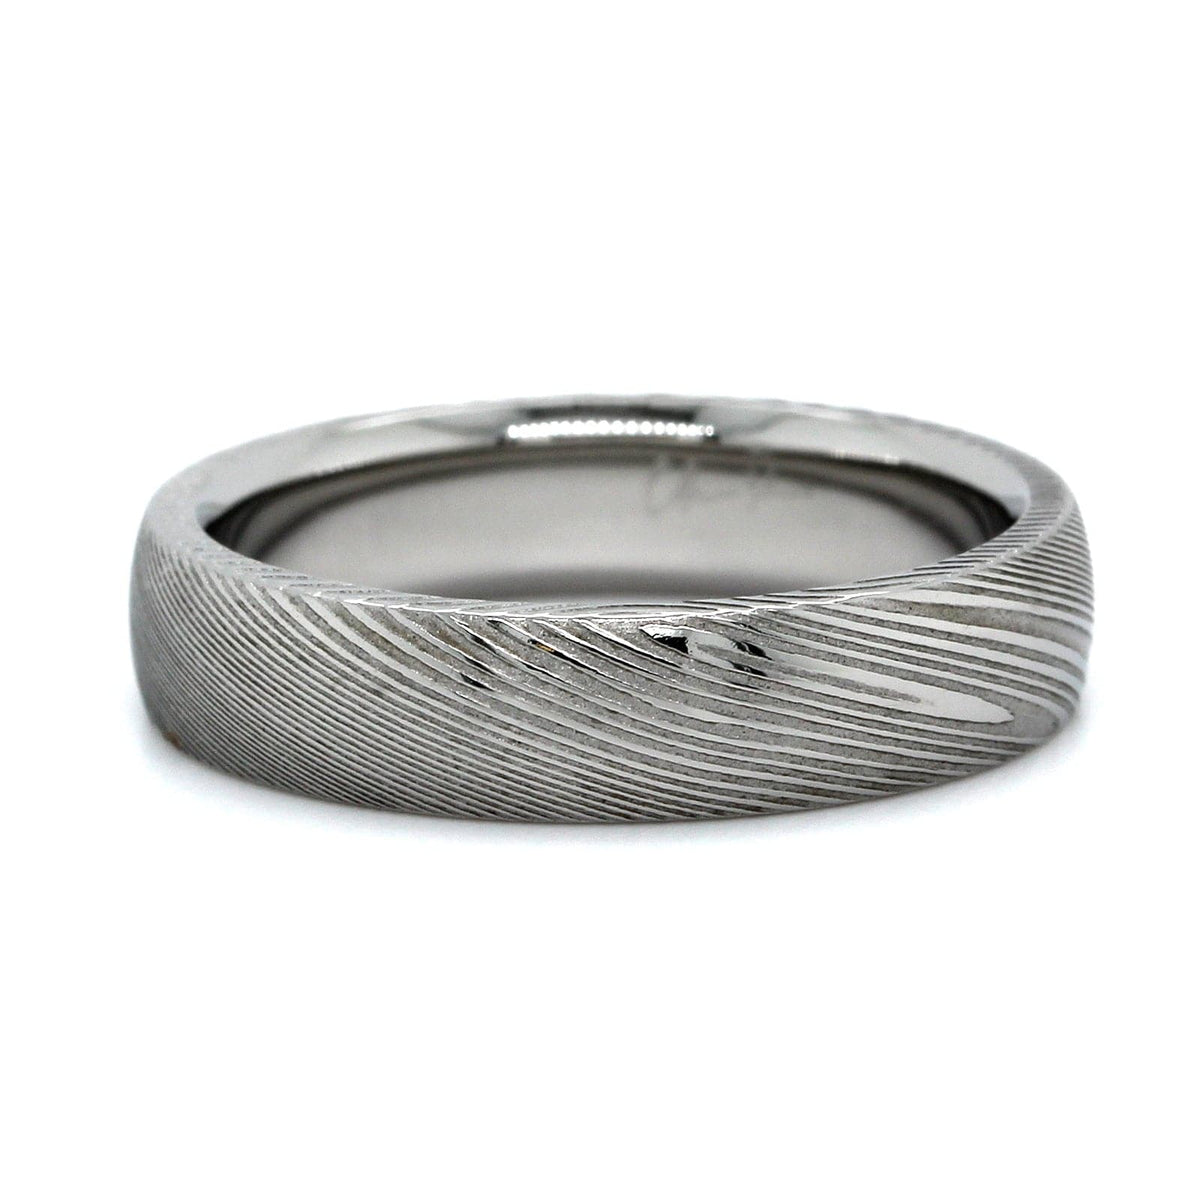 Stainless Steel 5mm Band with Slightly Rounded Profile